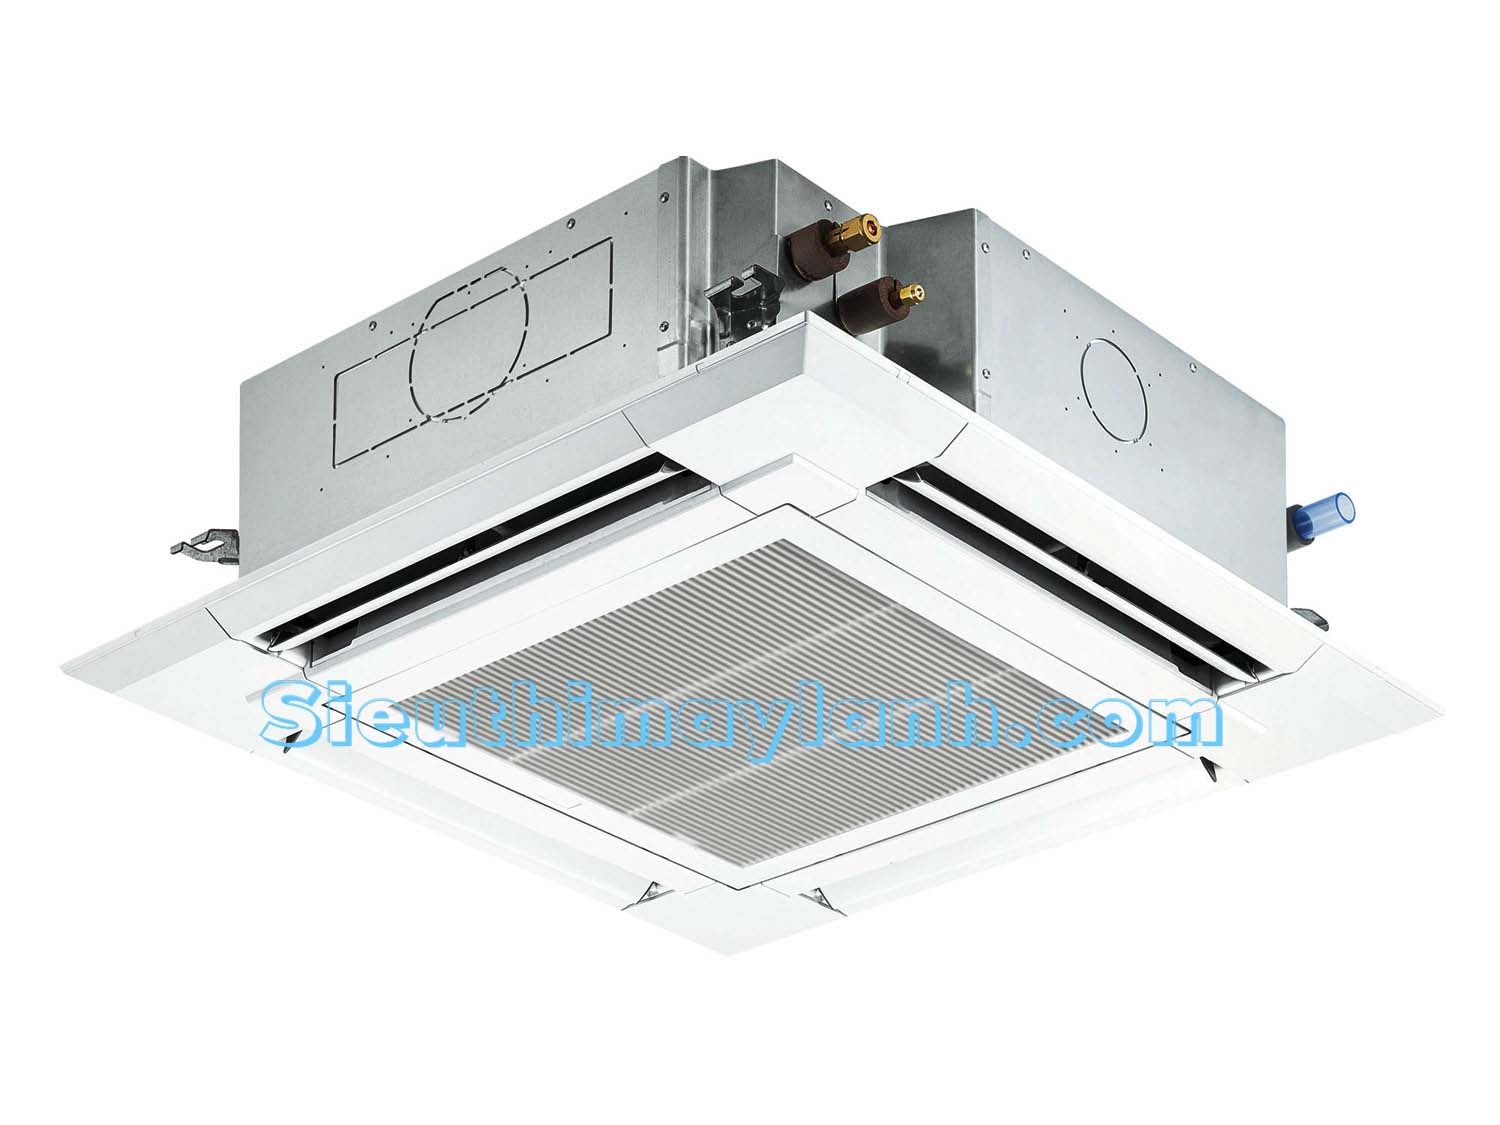 Mitsubishi Electric Ceiling mounted air conditioning PLY-P42BALCM Inverter (5.5Hp) - 3 phases